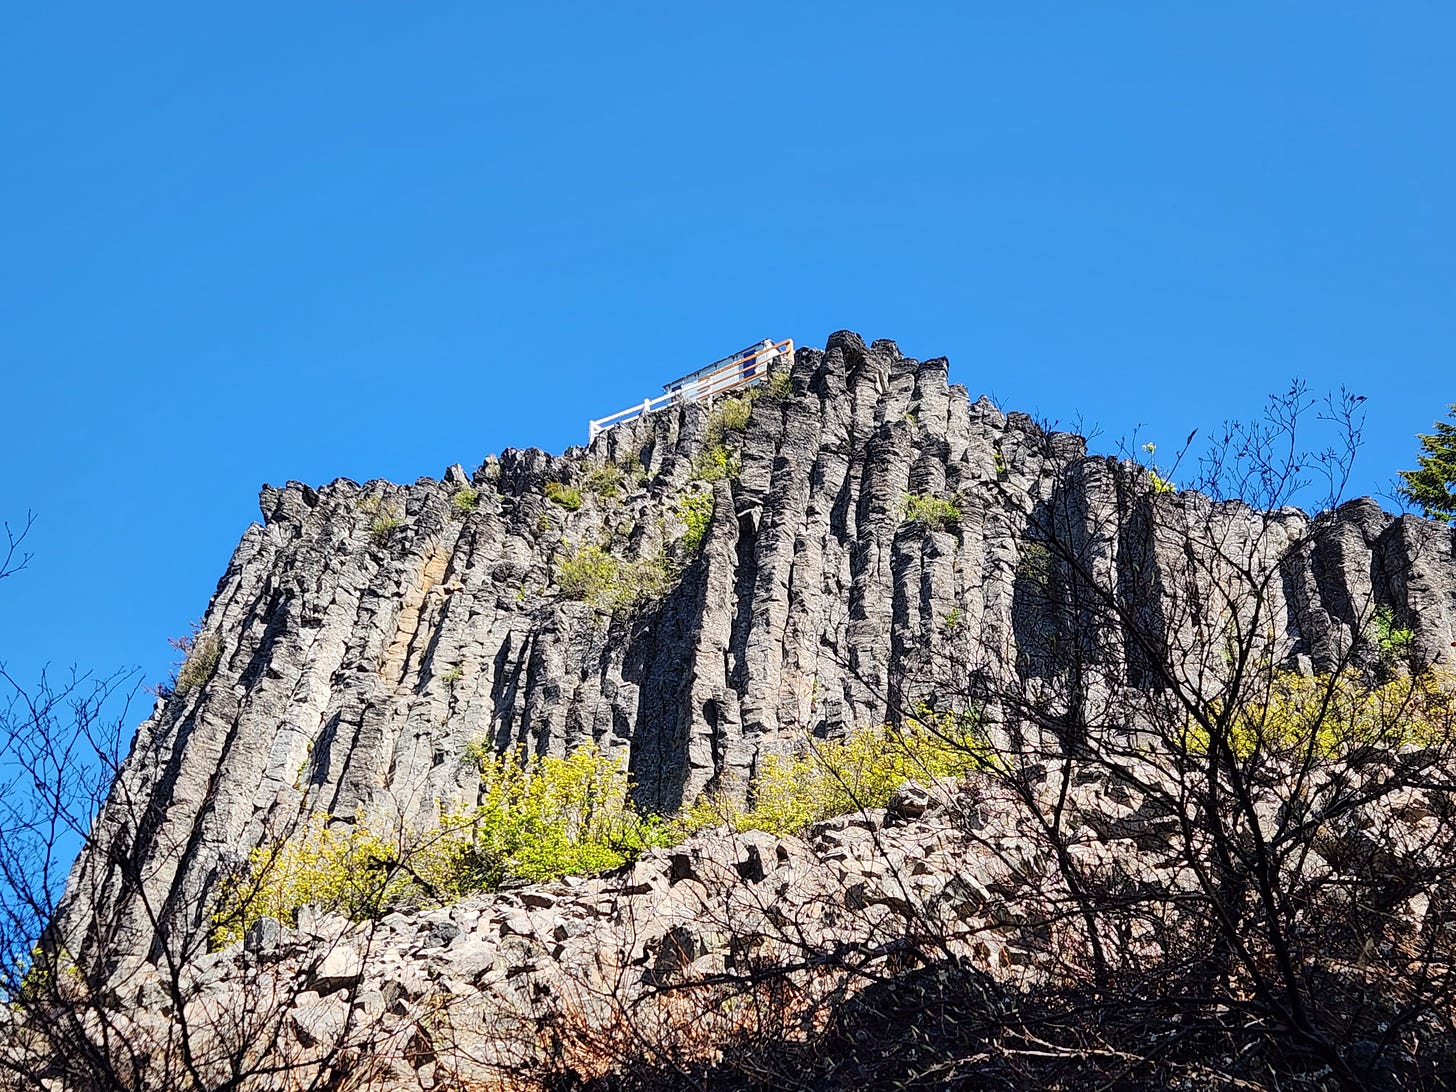 looking up at basalt columns with the edge of a white fire lookout visible